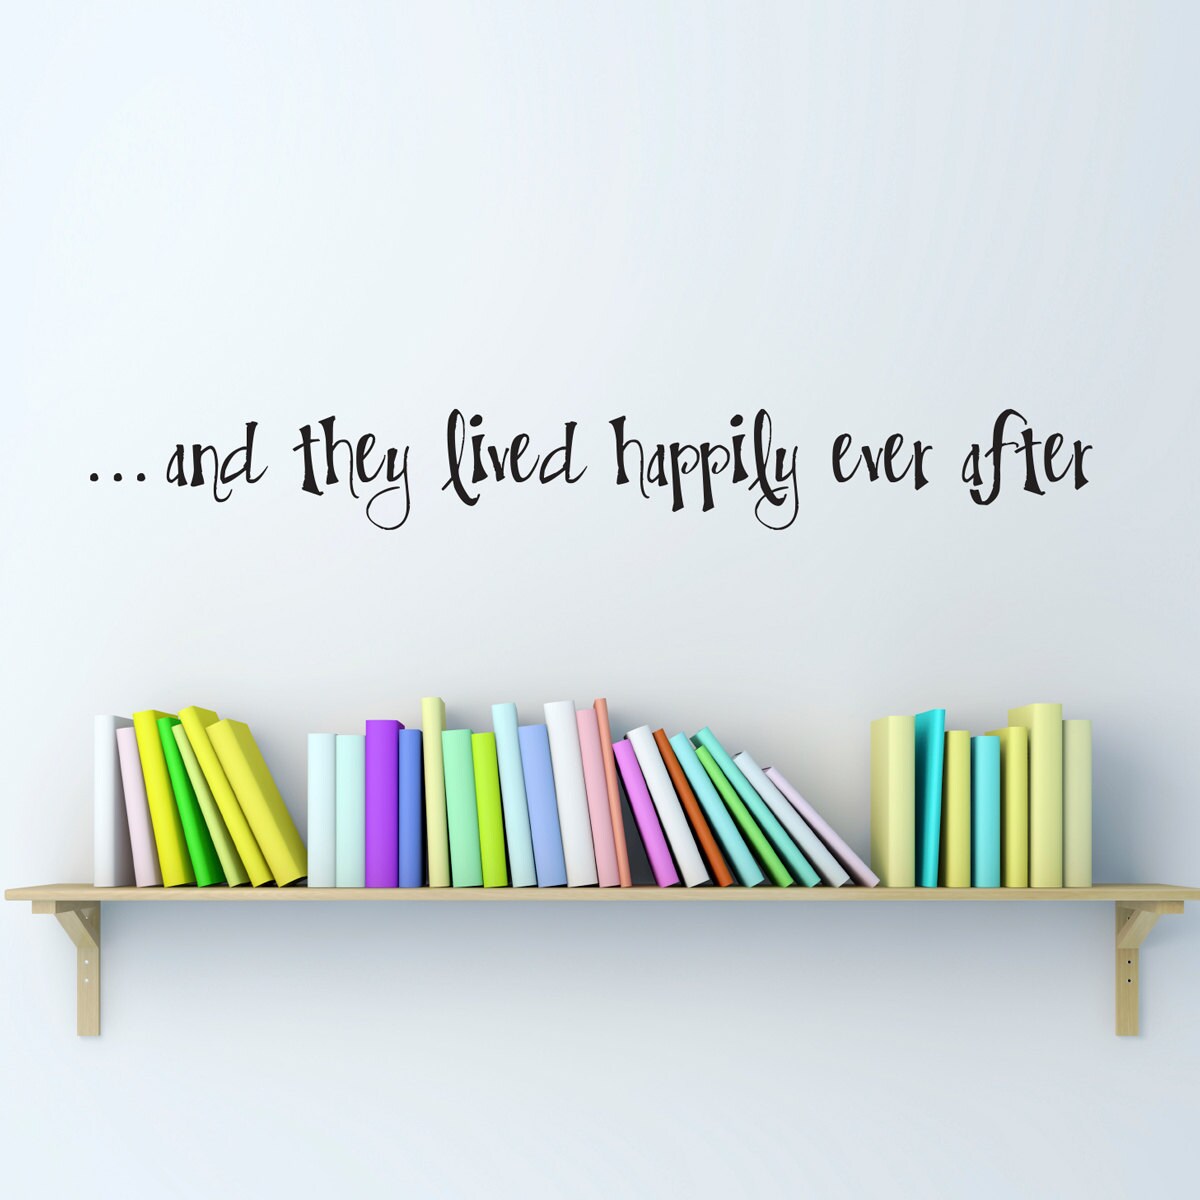 Happily Ever After Wall Decal - Decal Quote - Fairy Tale Quote - Medium